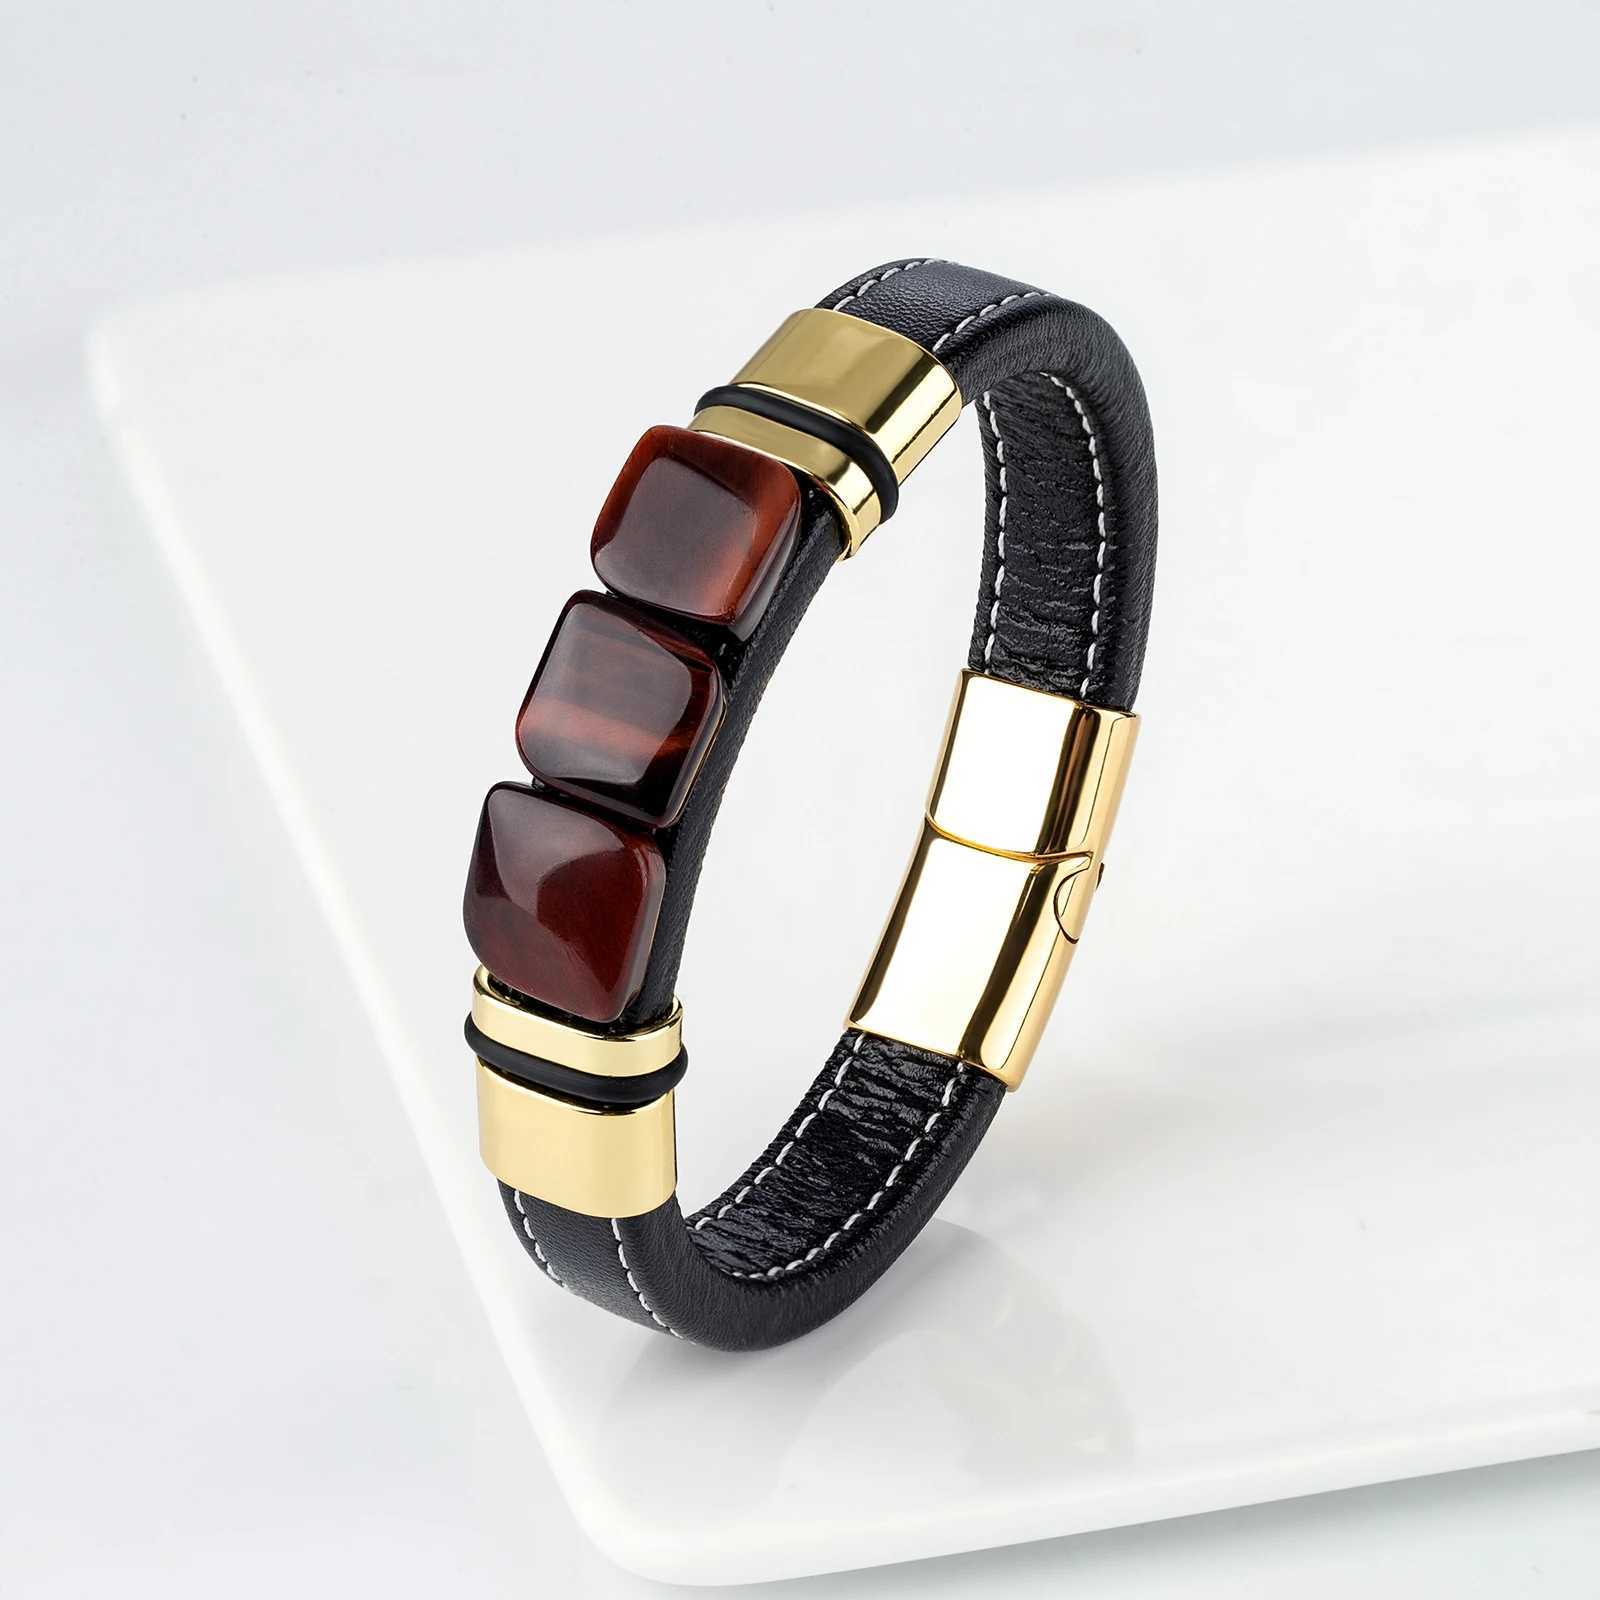 Bangle New Multicolor 3 Square Natural Old Eye Tiger Vintage Jewelry With Hanging Ornament Wide Leather Rope Men Steel Bracelet 240319